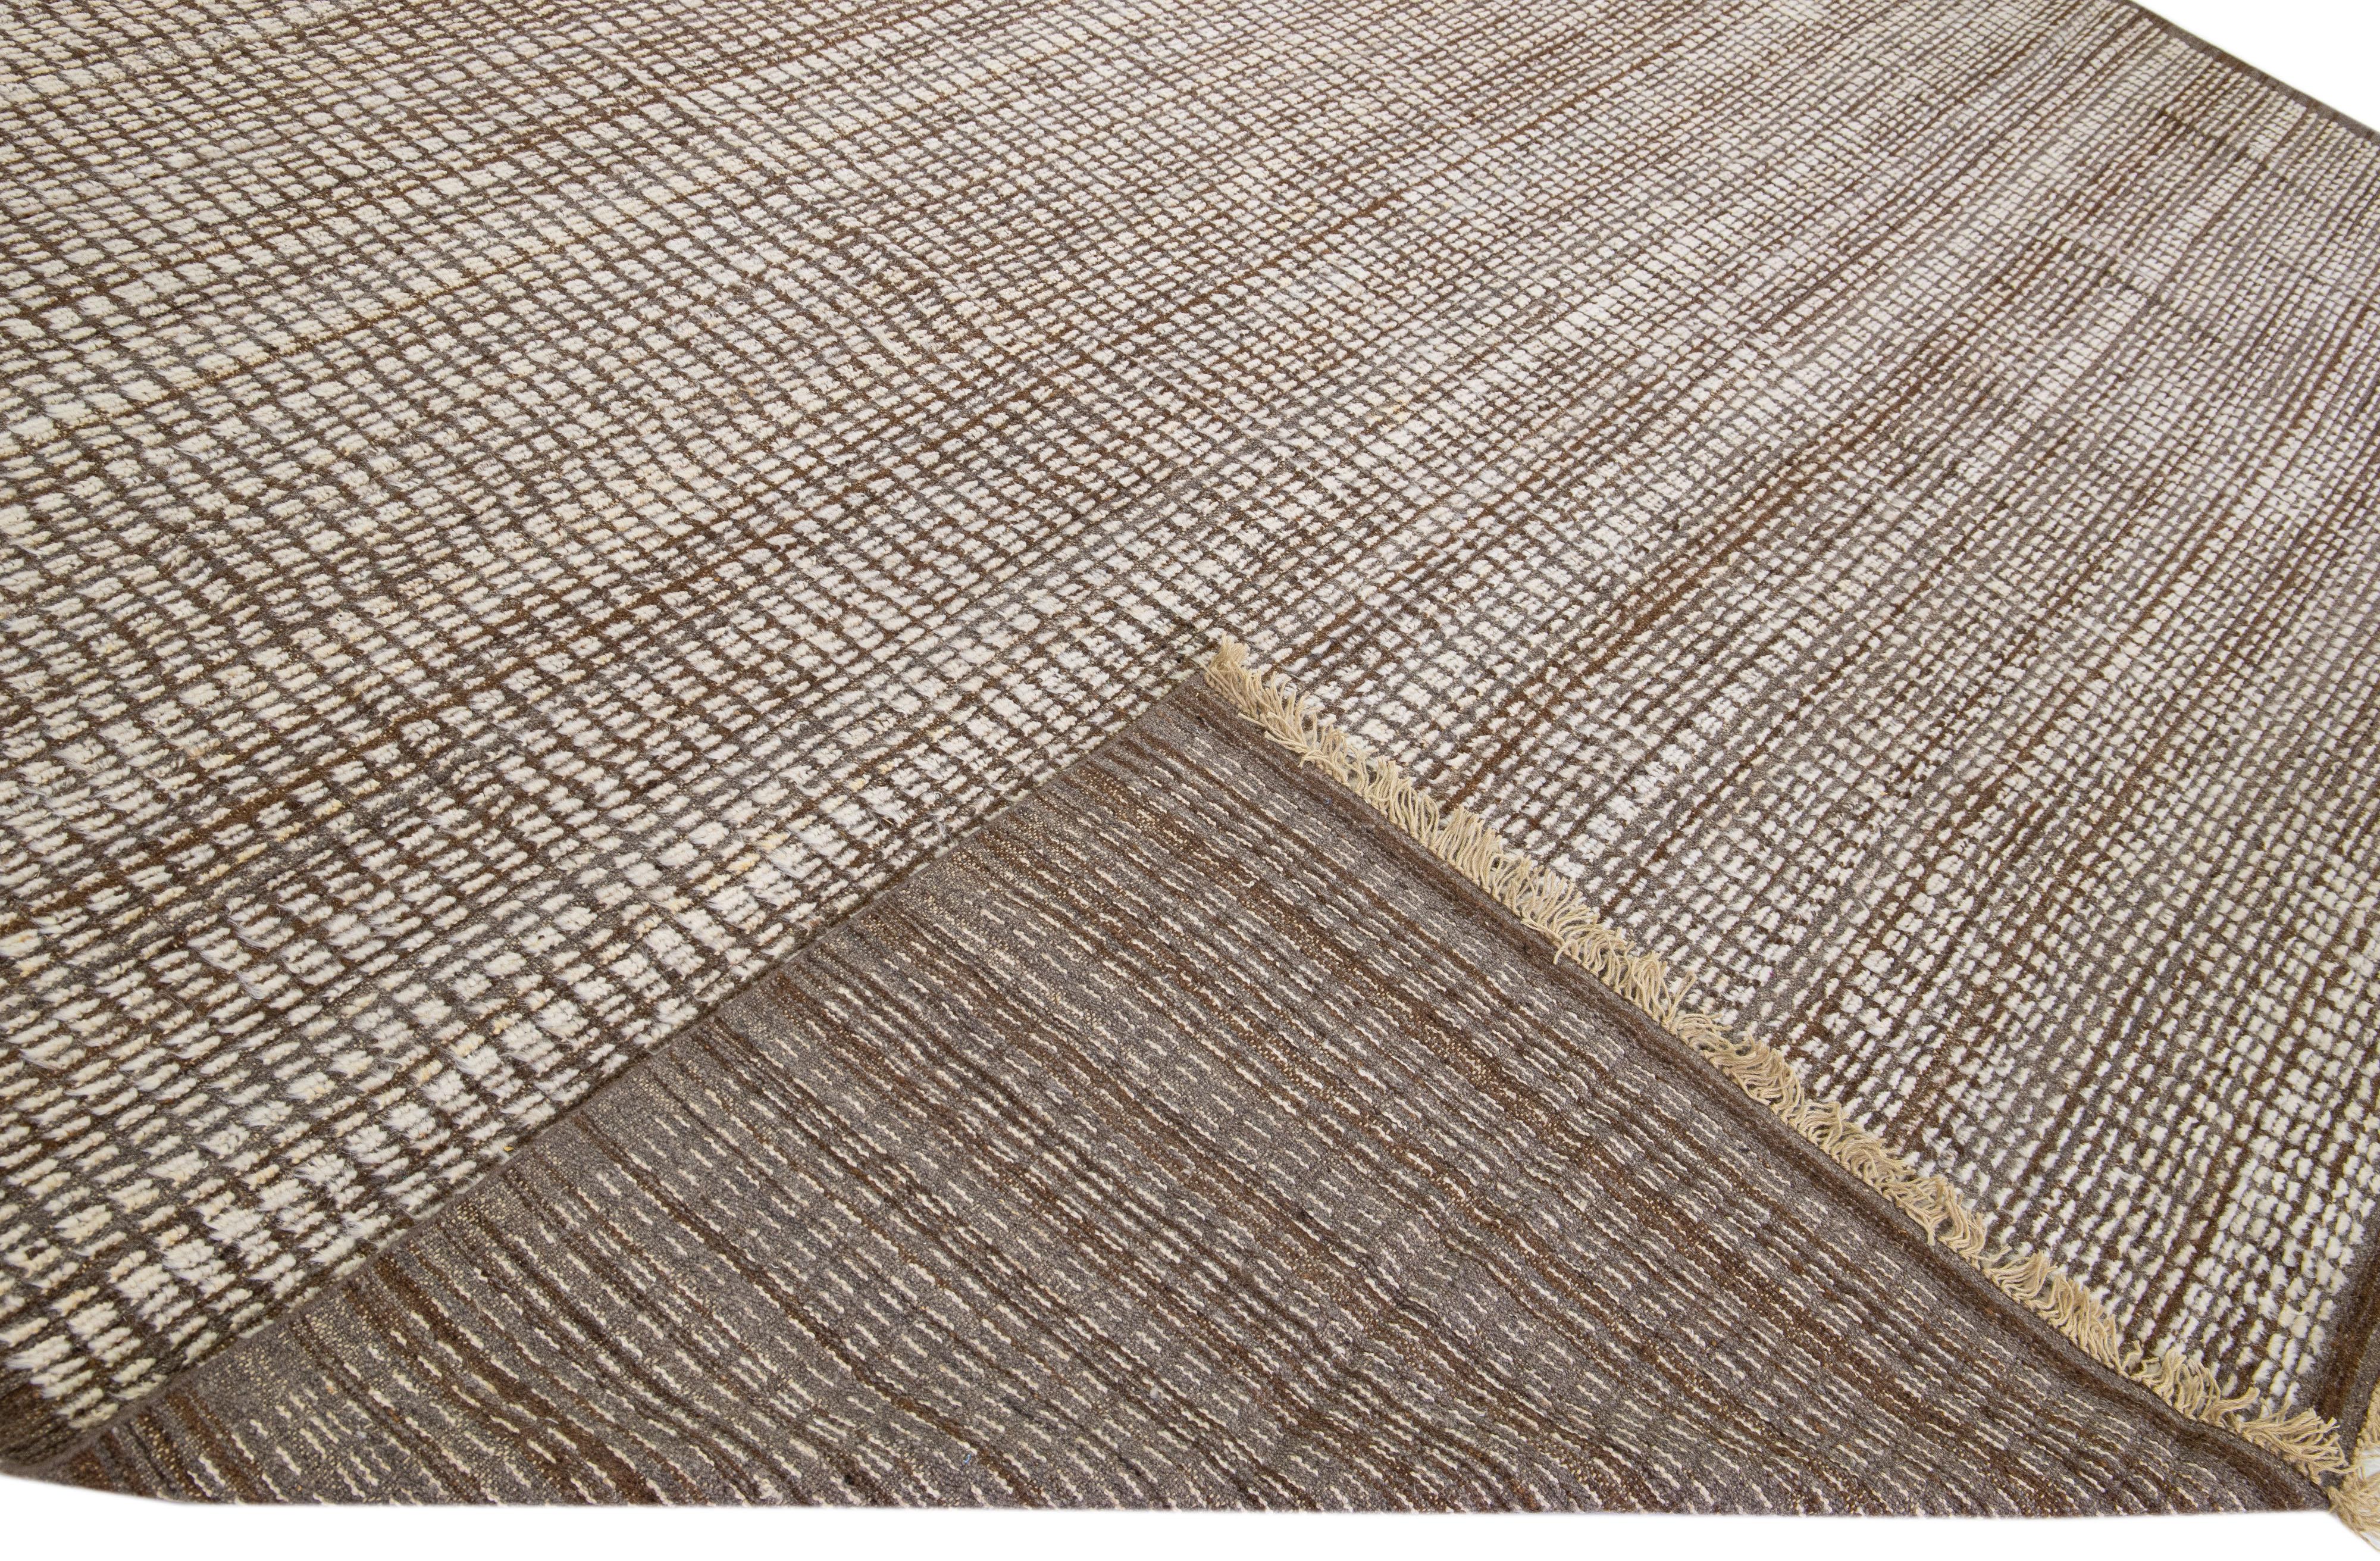 Beautiful modern Moroccan style hand-knotted wool rug with a brown field. This piece has a gorgeous subtle geometric pattern design.

This rug measures: 12'5